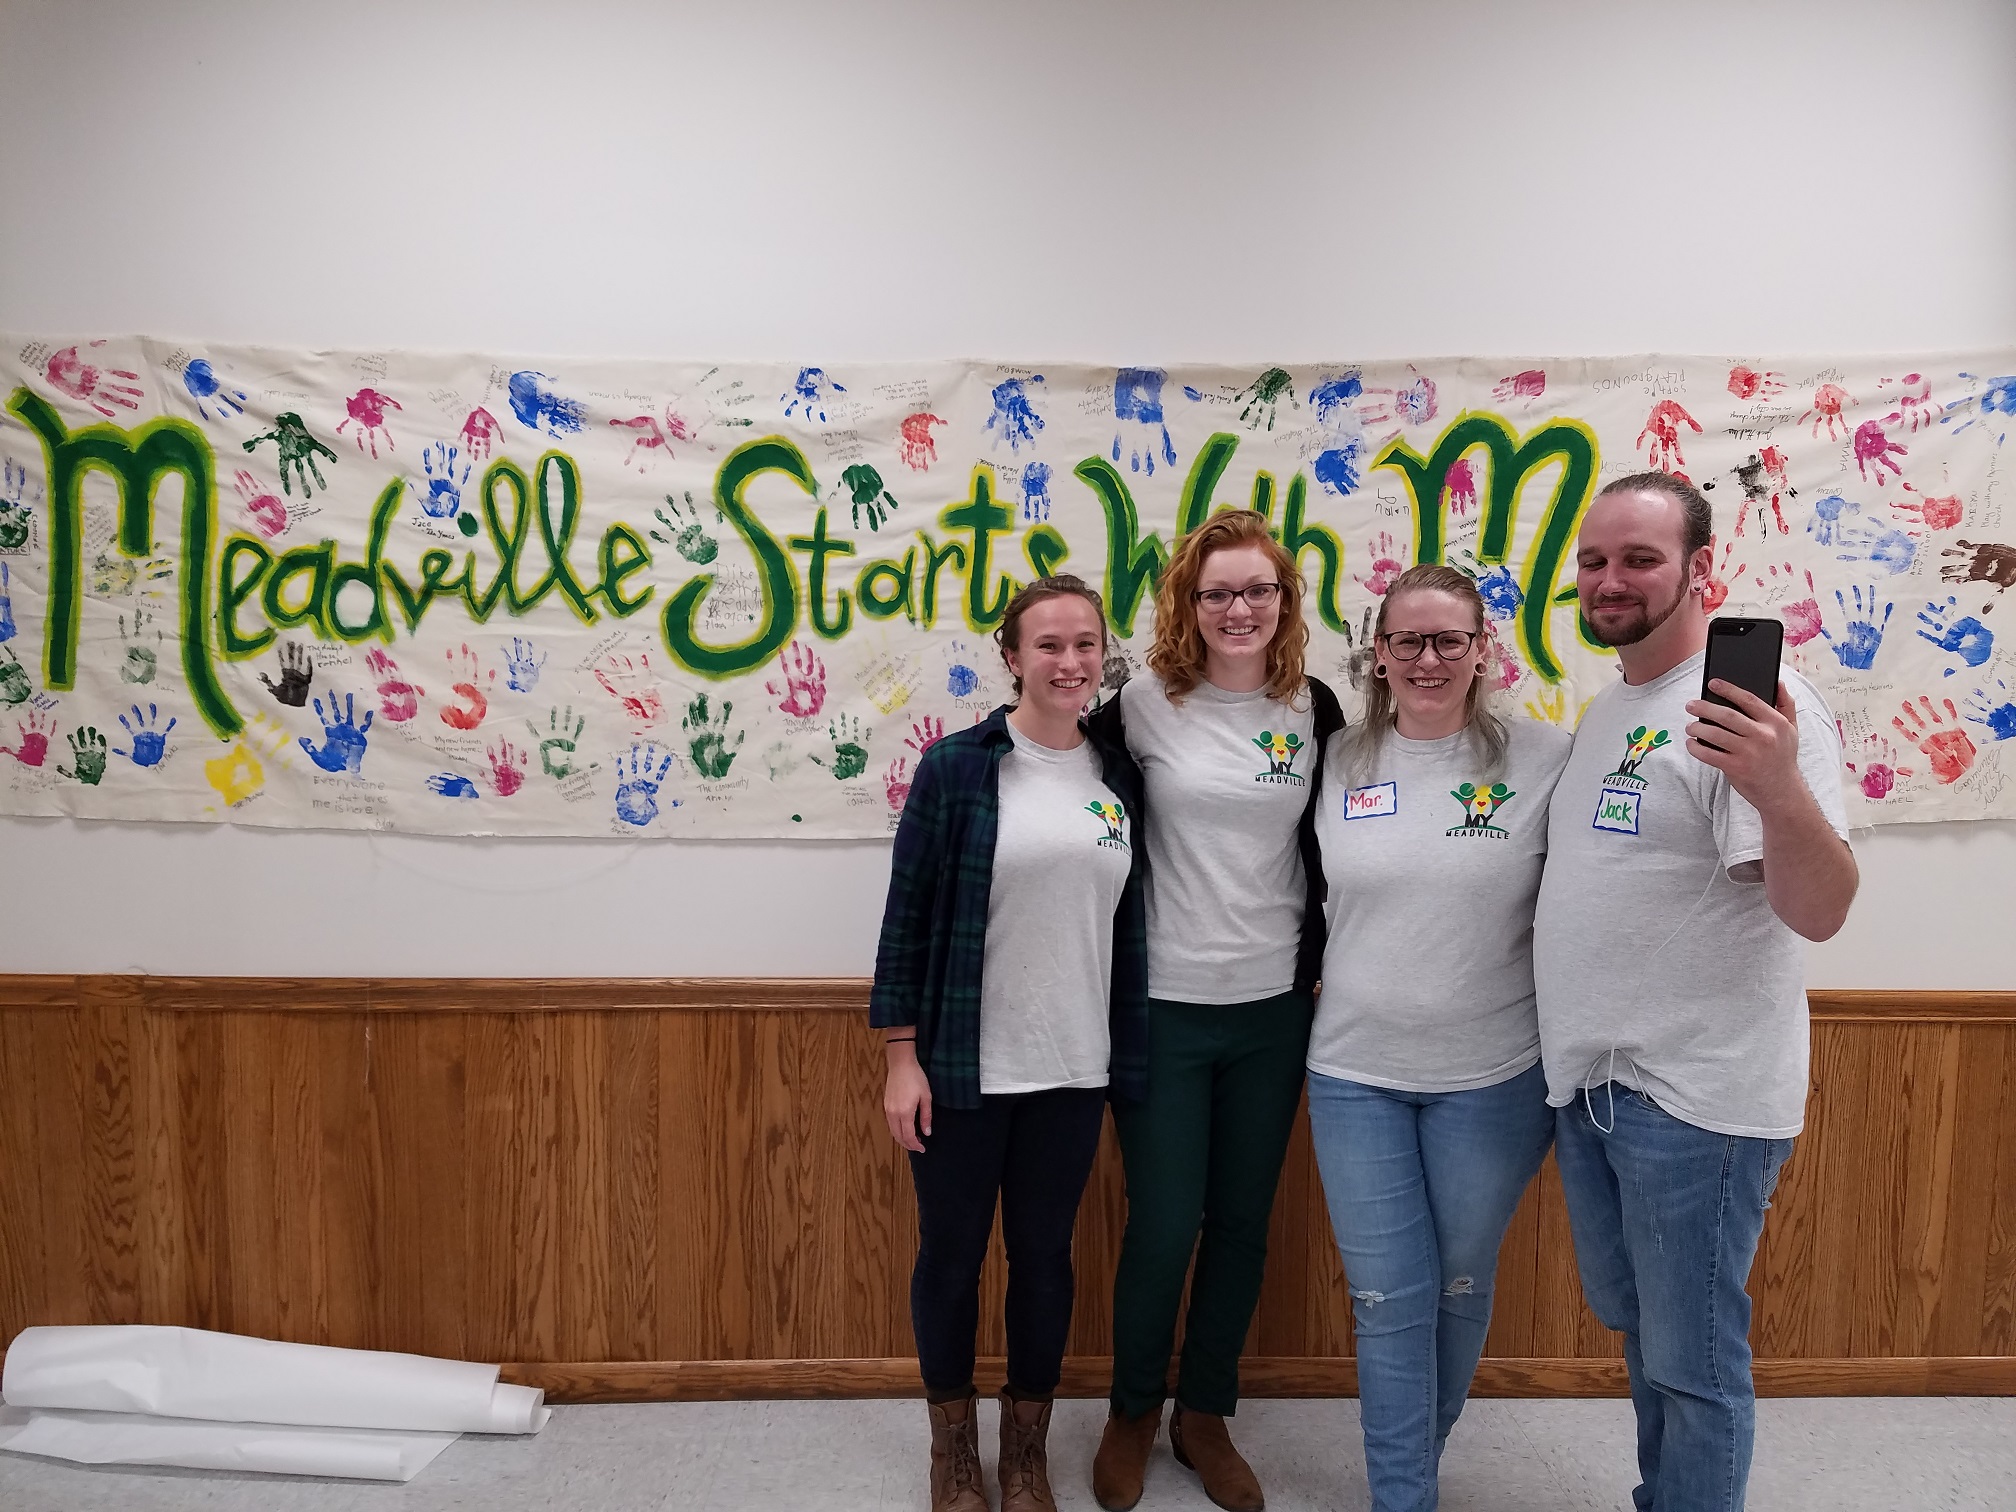 The My Meadville leadership team poses alongside the project’s catchphrase, “Meadville starts with me.” Used by permission.